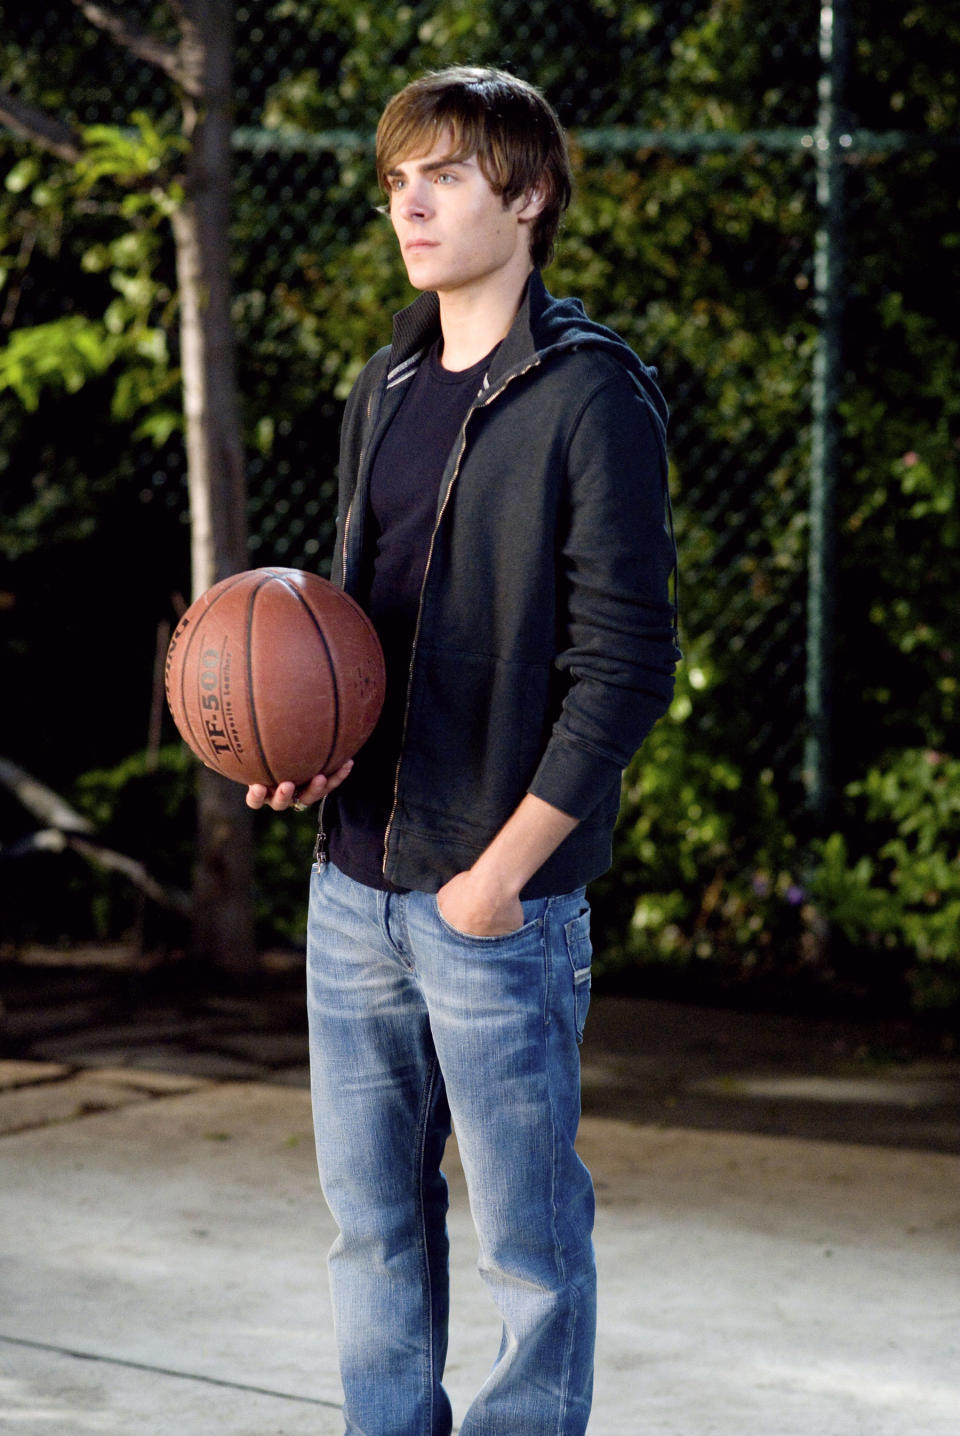 Zac holding a basketball in a scene from "High School Musical"